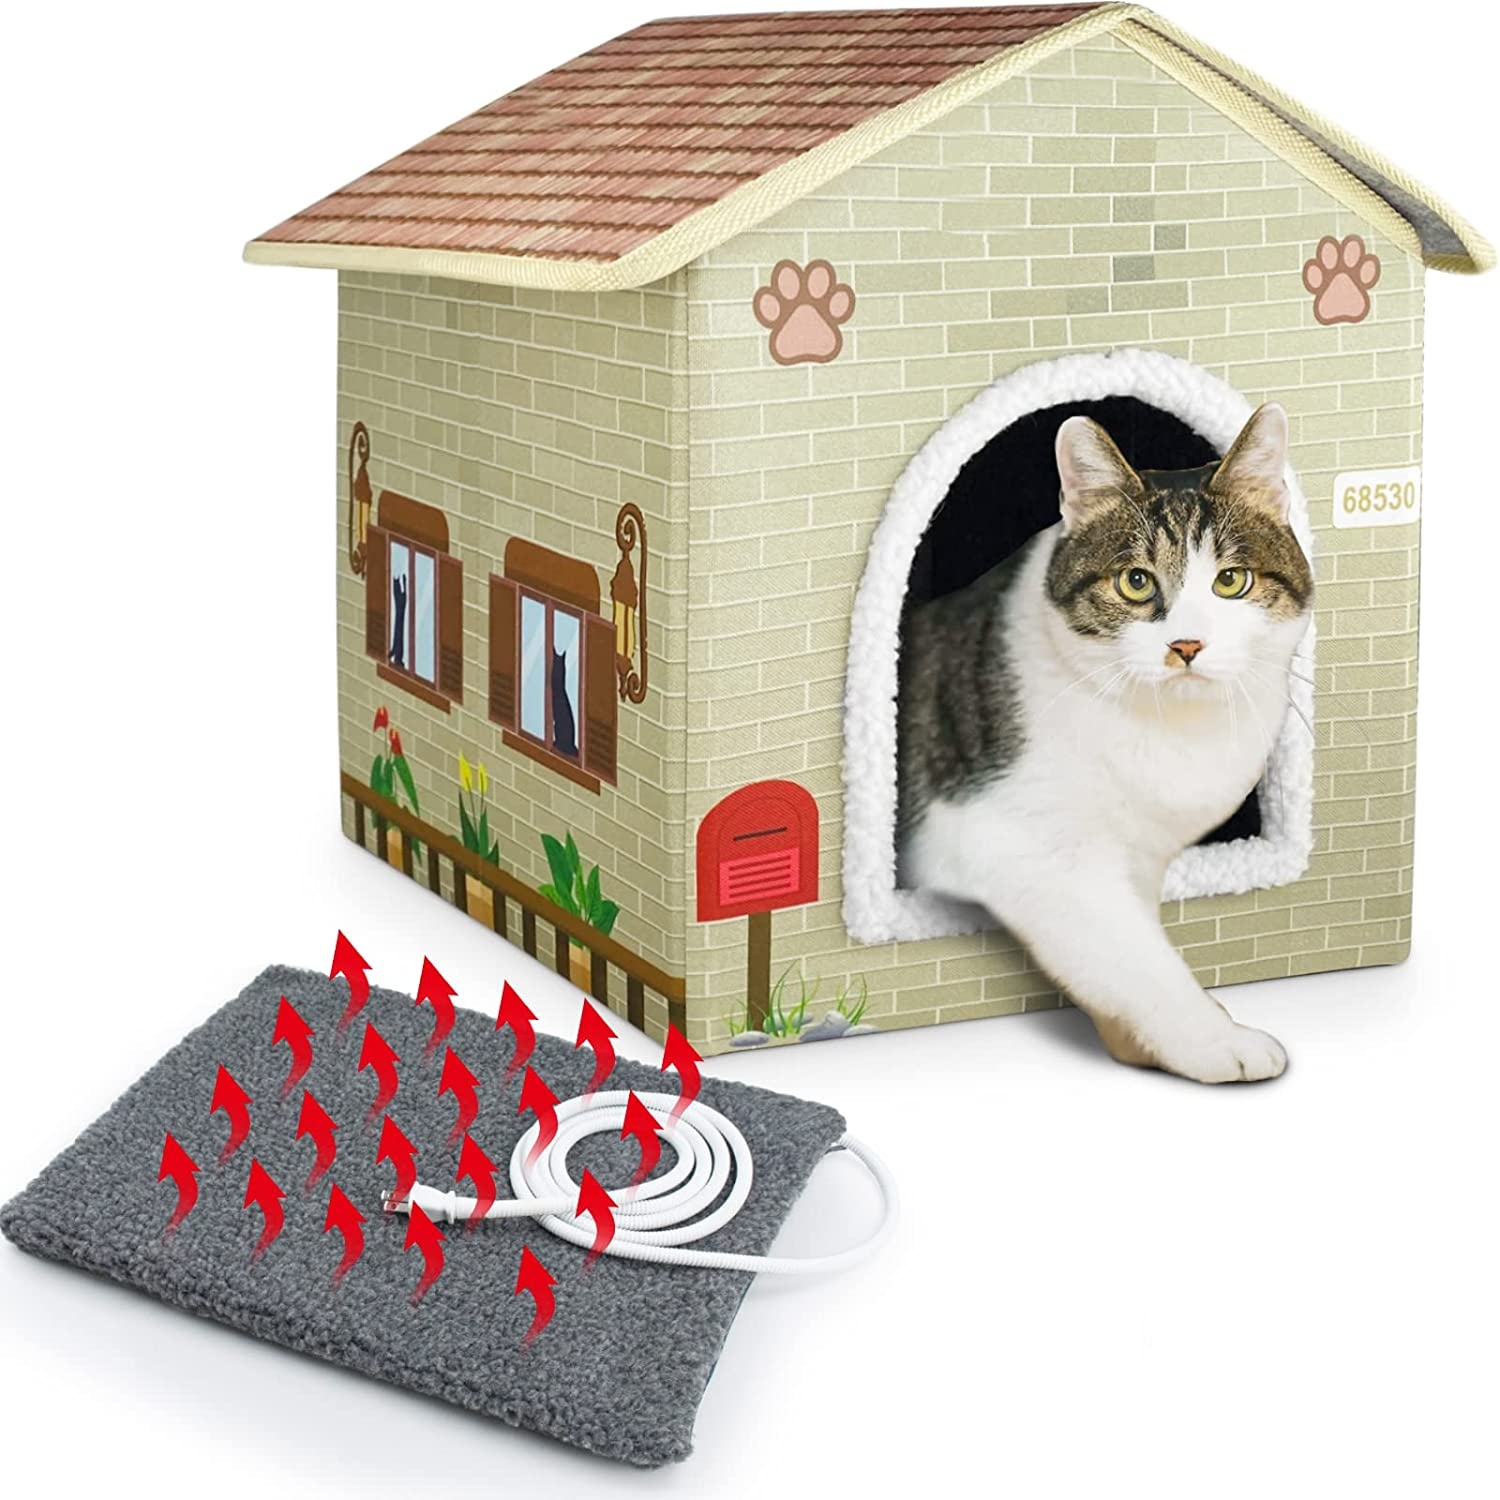 Large Heated Cat House for Outdoor Cats in Winter，Weatherproof Heated Cat Houses with Pet Heating Pad, Providing Warm and Cozy Homefor Your Pet,Easy to Assemble